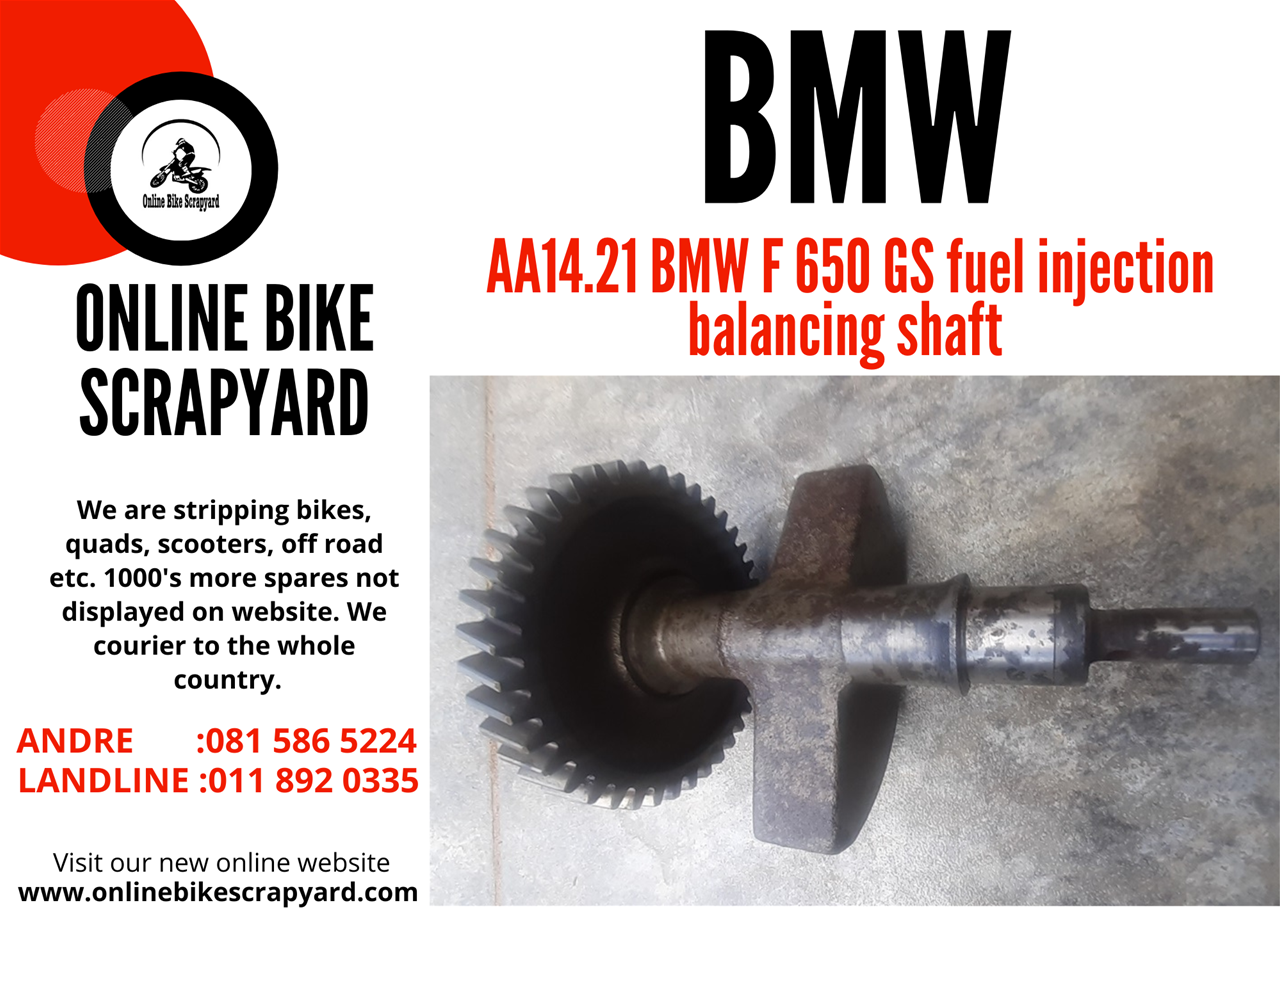 Balancing shaft. Online bike Scrapyard new and secondhand spares and accessories